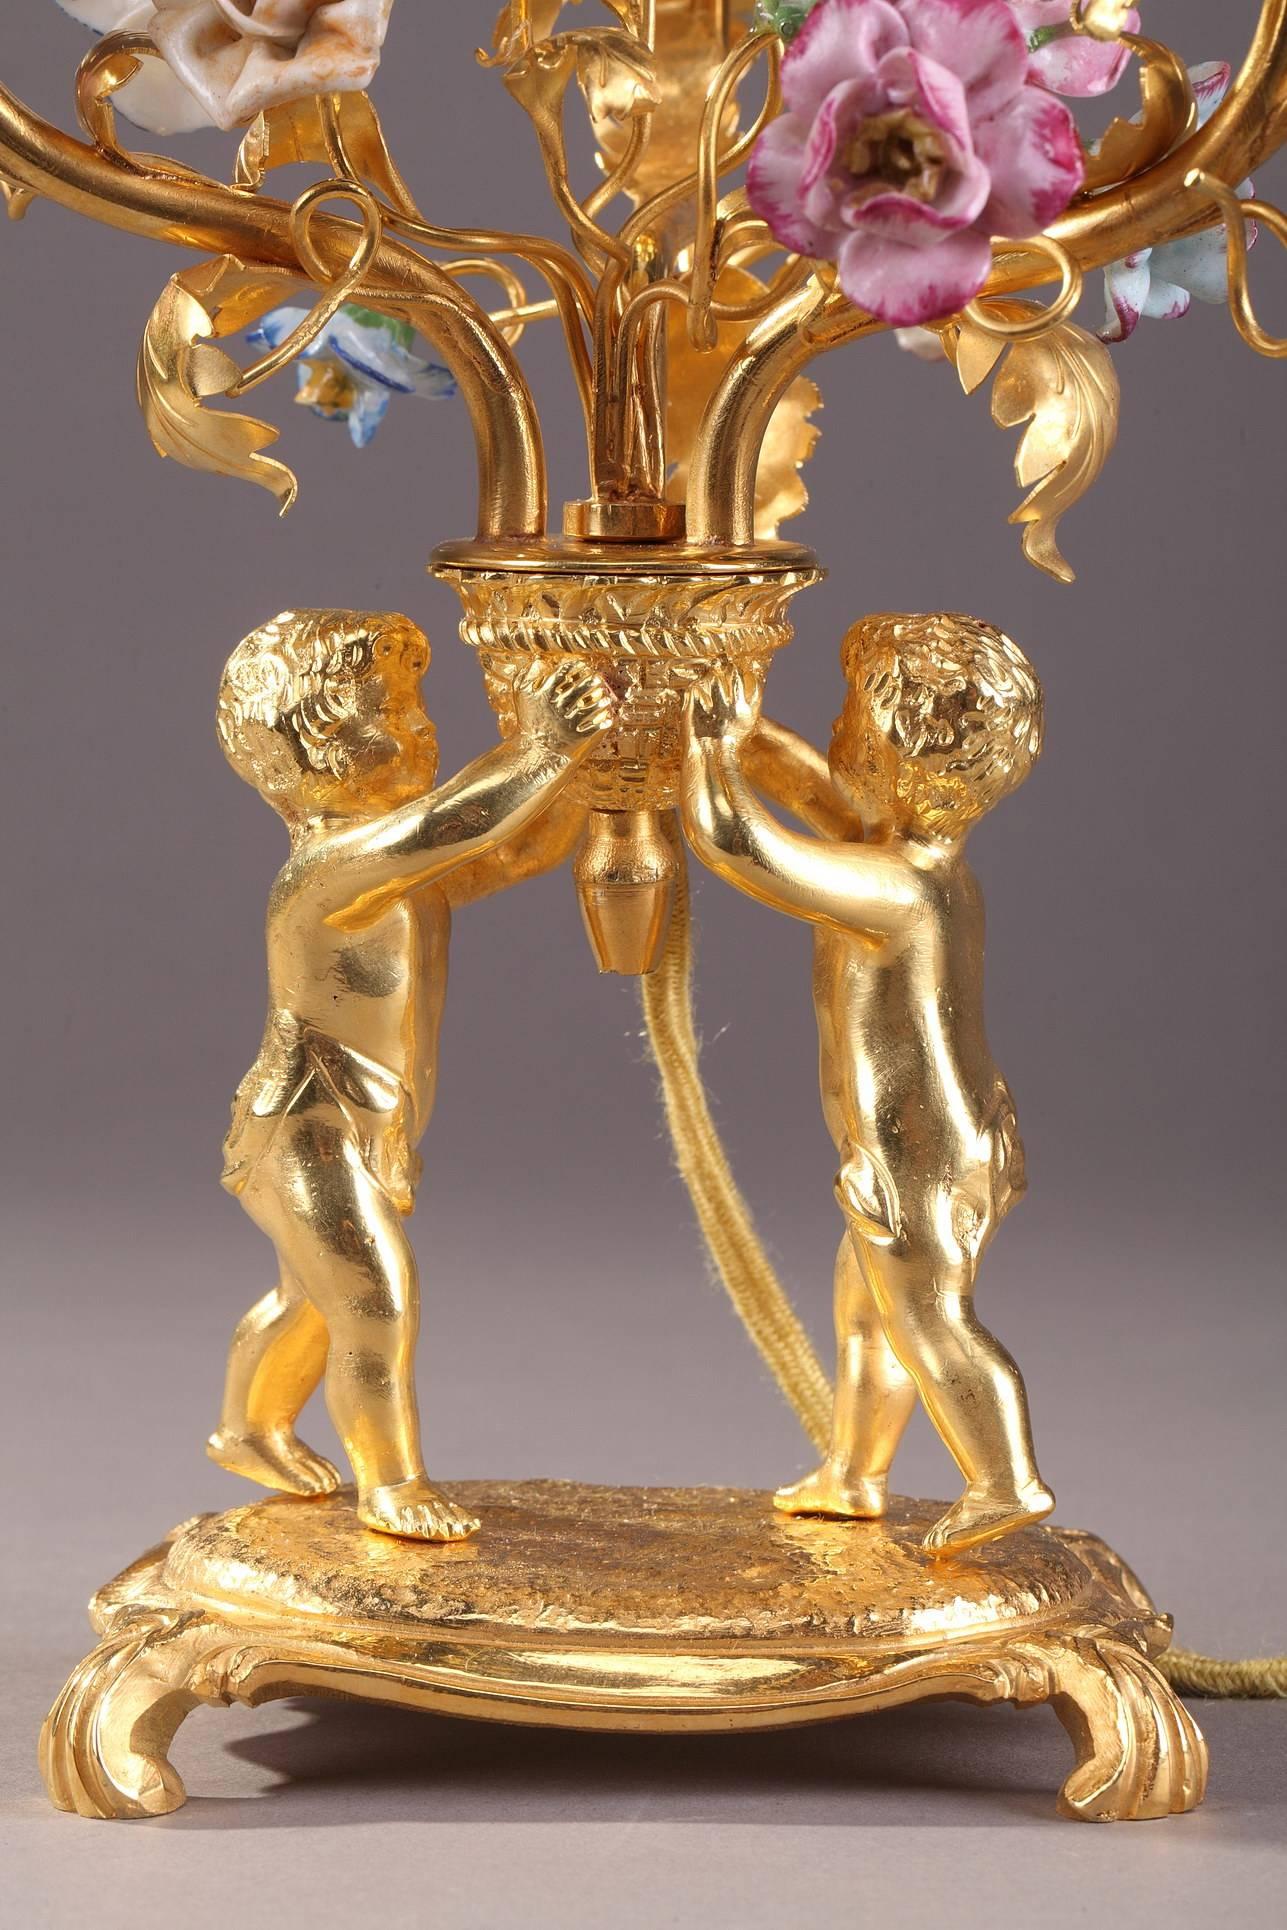 19th Century Pair of Gilt Bronze and Porcelain Candelabras in Louis XV Style